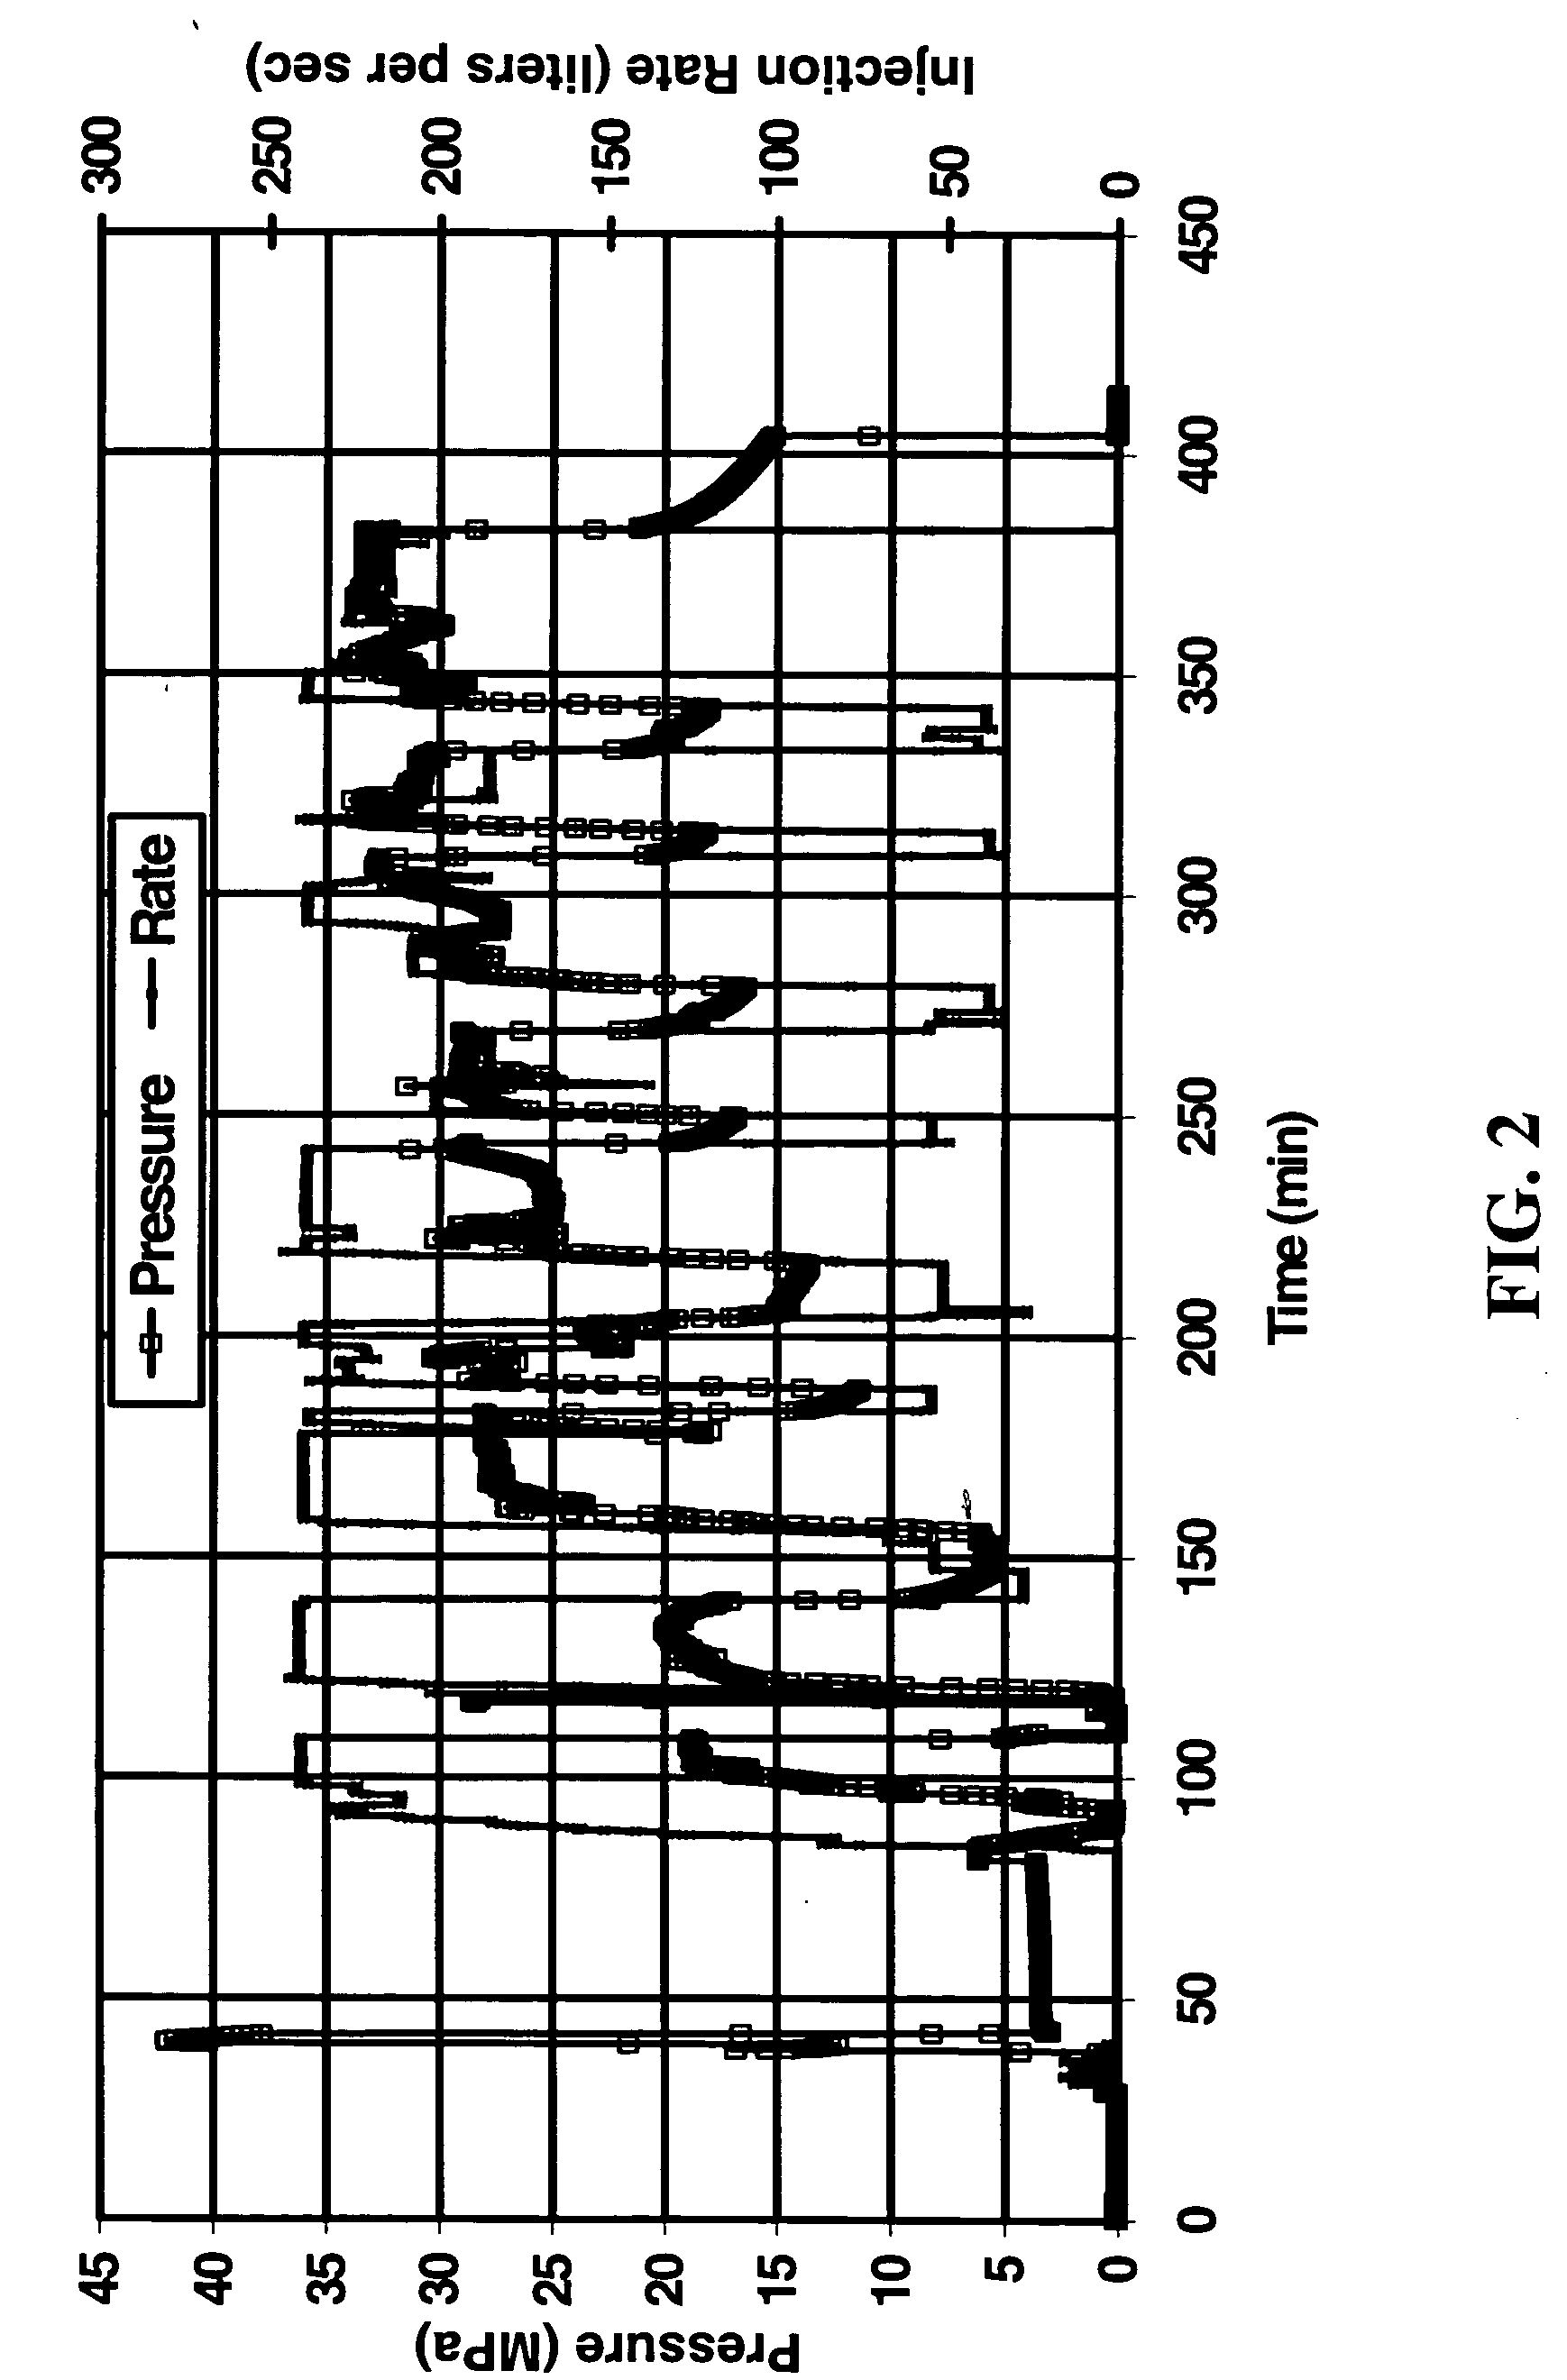 Methods for controlling fluid loss